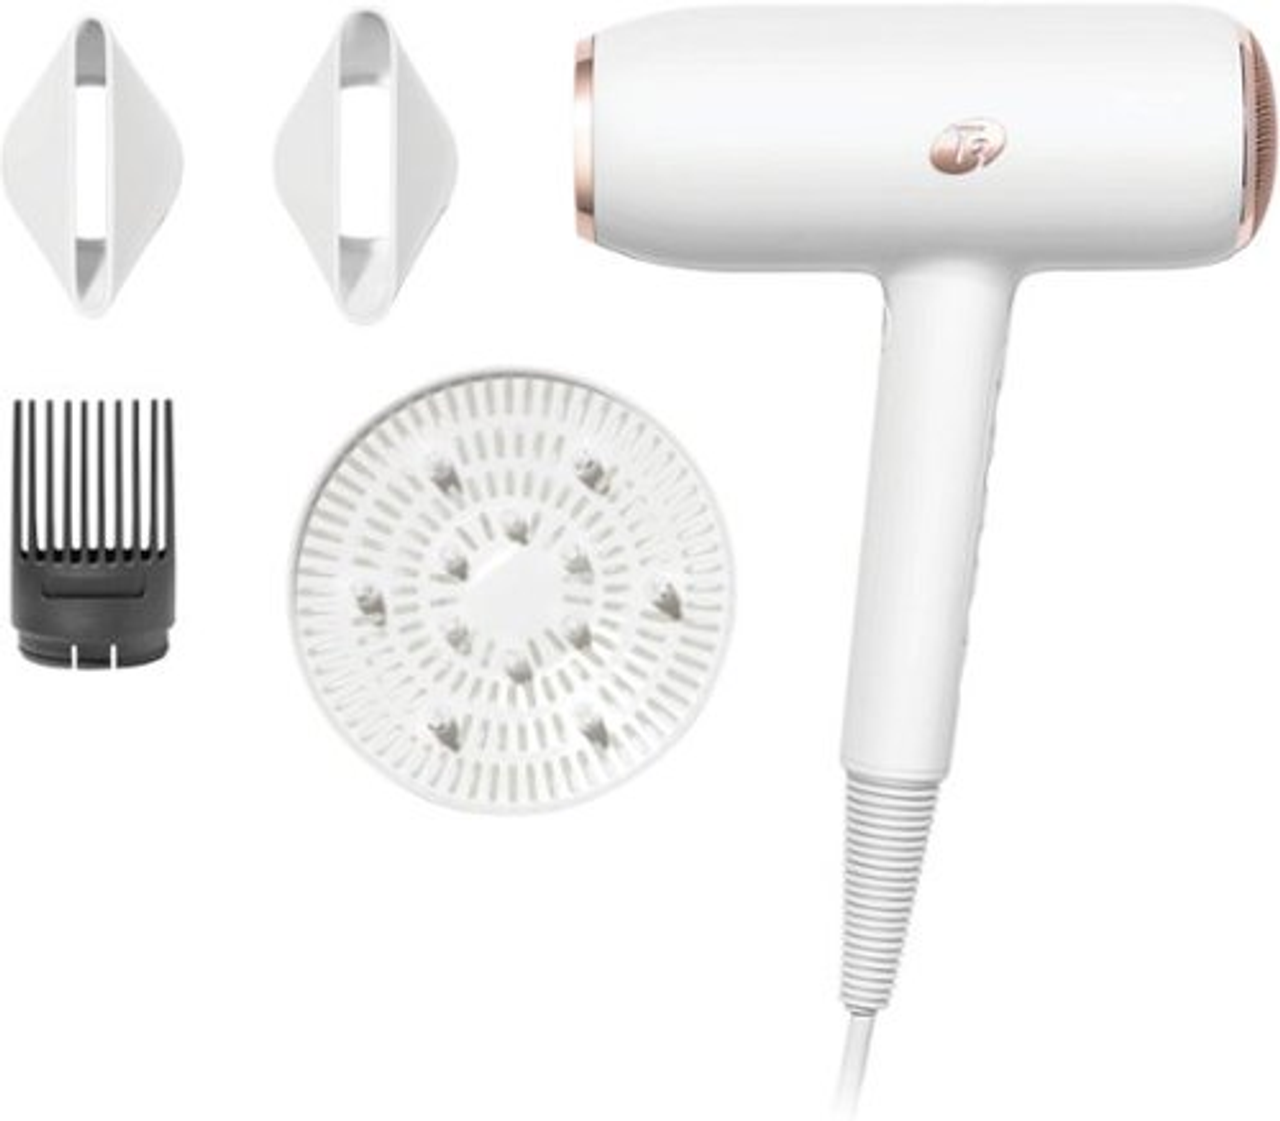 T3 - Featherweight StyleMax Professional Hair Dryer with Custom Heat & Speed Automation and 4 Attachments - White & Rose Gold